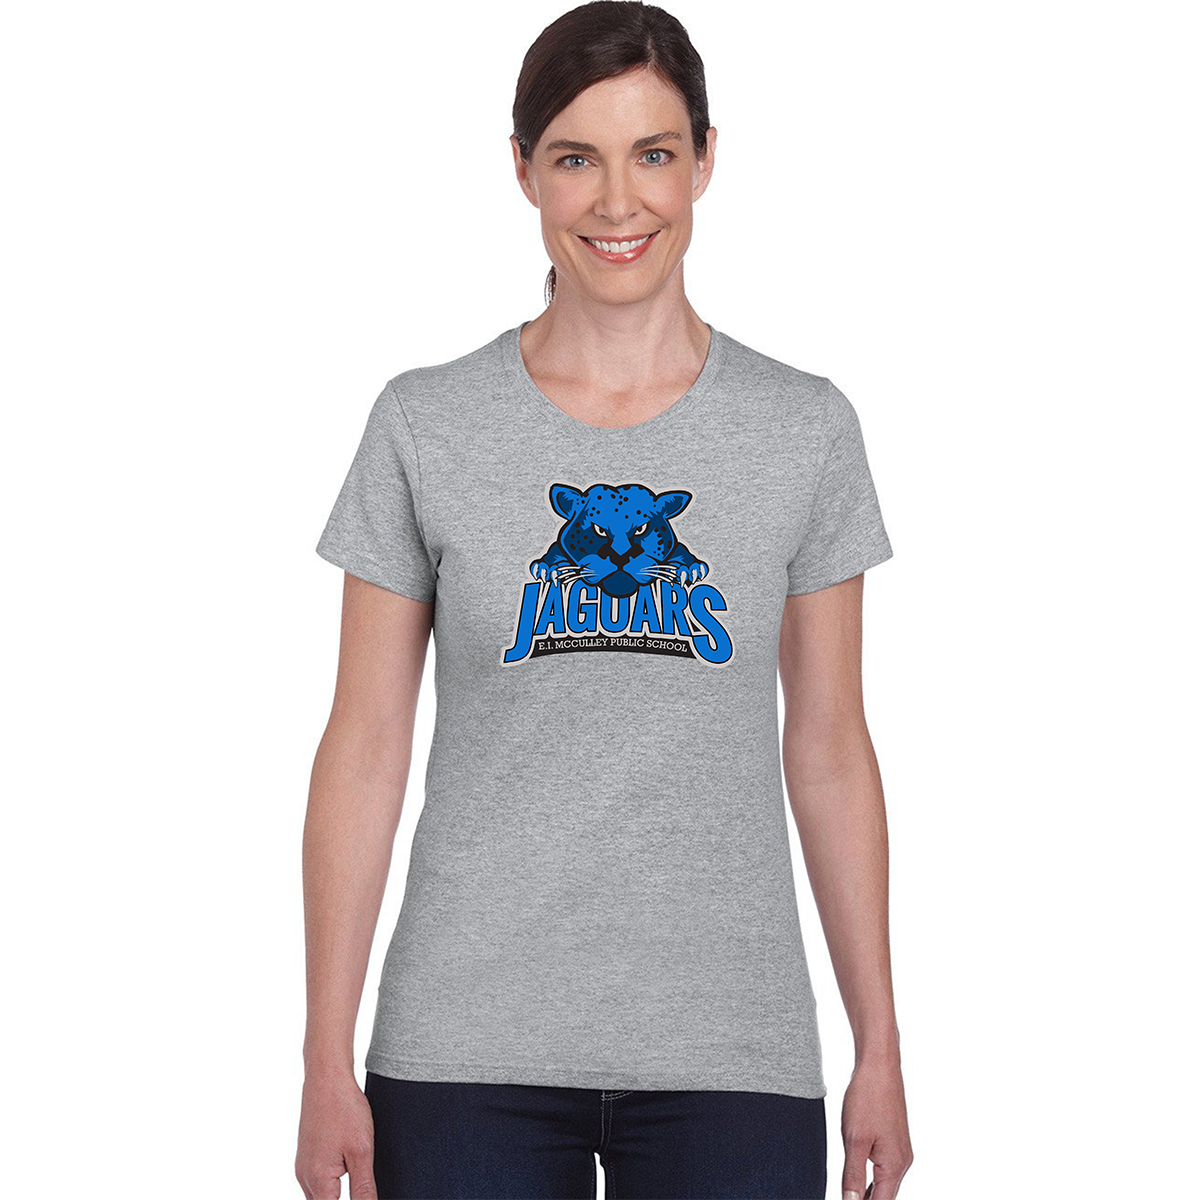 E. I. McCulley Jaguars Adult 100% Cotton T-Shirt Printed – #EIMJ5000P1 ...